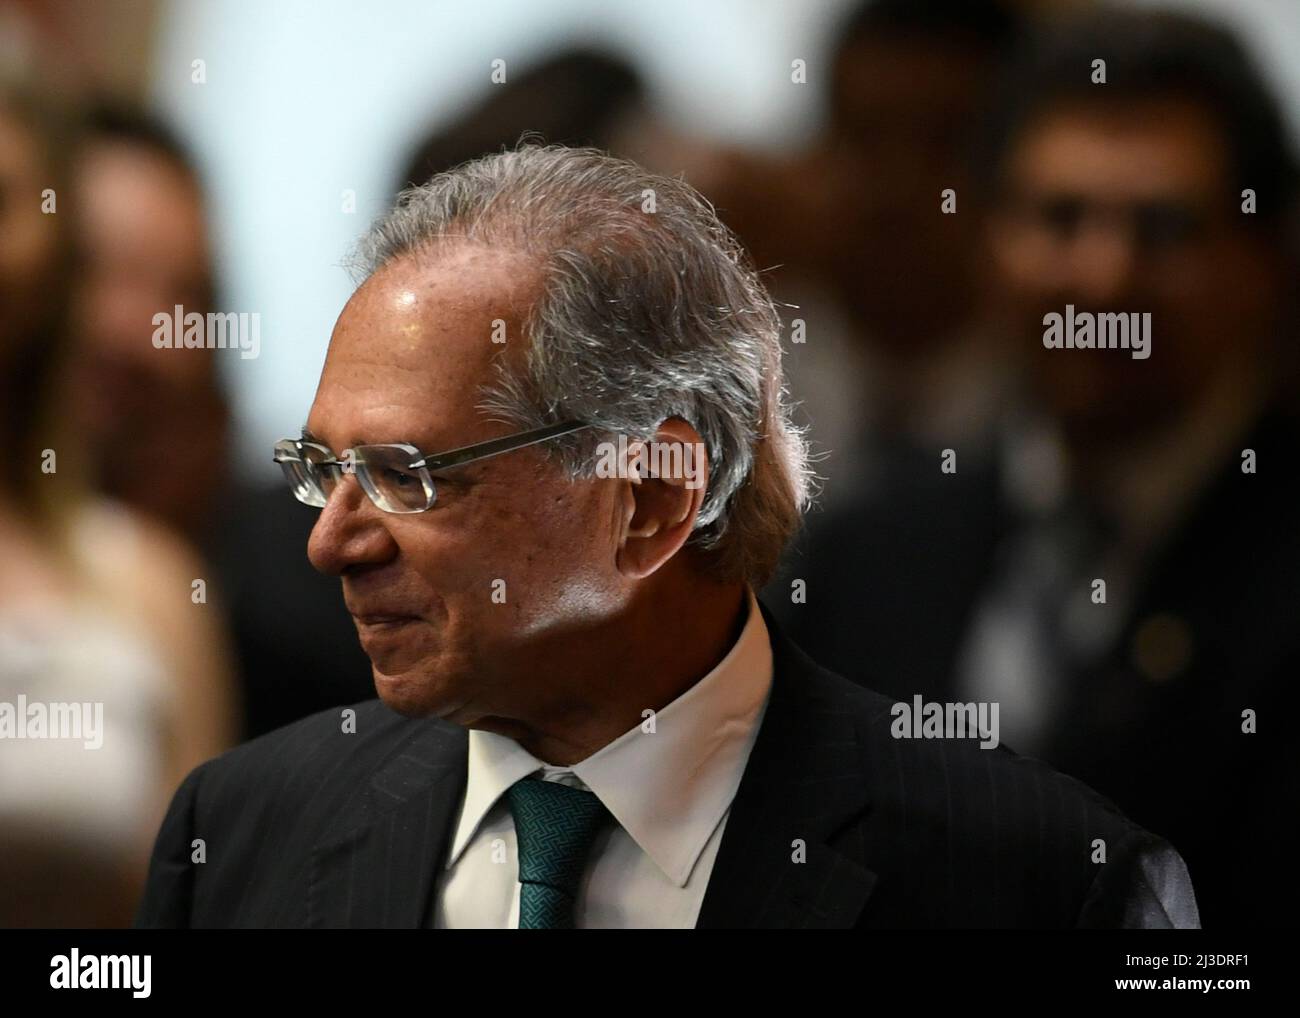 Brasilia, Brazil. 07th Apr, 2022. DF - Brasilia - 04/07/2022 - BRASILIA, BB ANTICIPA FRETE - The Minister of Economy, Paulo Guedes, during the Launch Ceremony of &quot;BB Anticipa Freight&quot; and &quot;BB CPR Preservation&quot; this Thursday, April 7th. Photo: Mateus Bonomi/AGIF Credit: AGIF/Alamy Live News Stock Photo